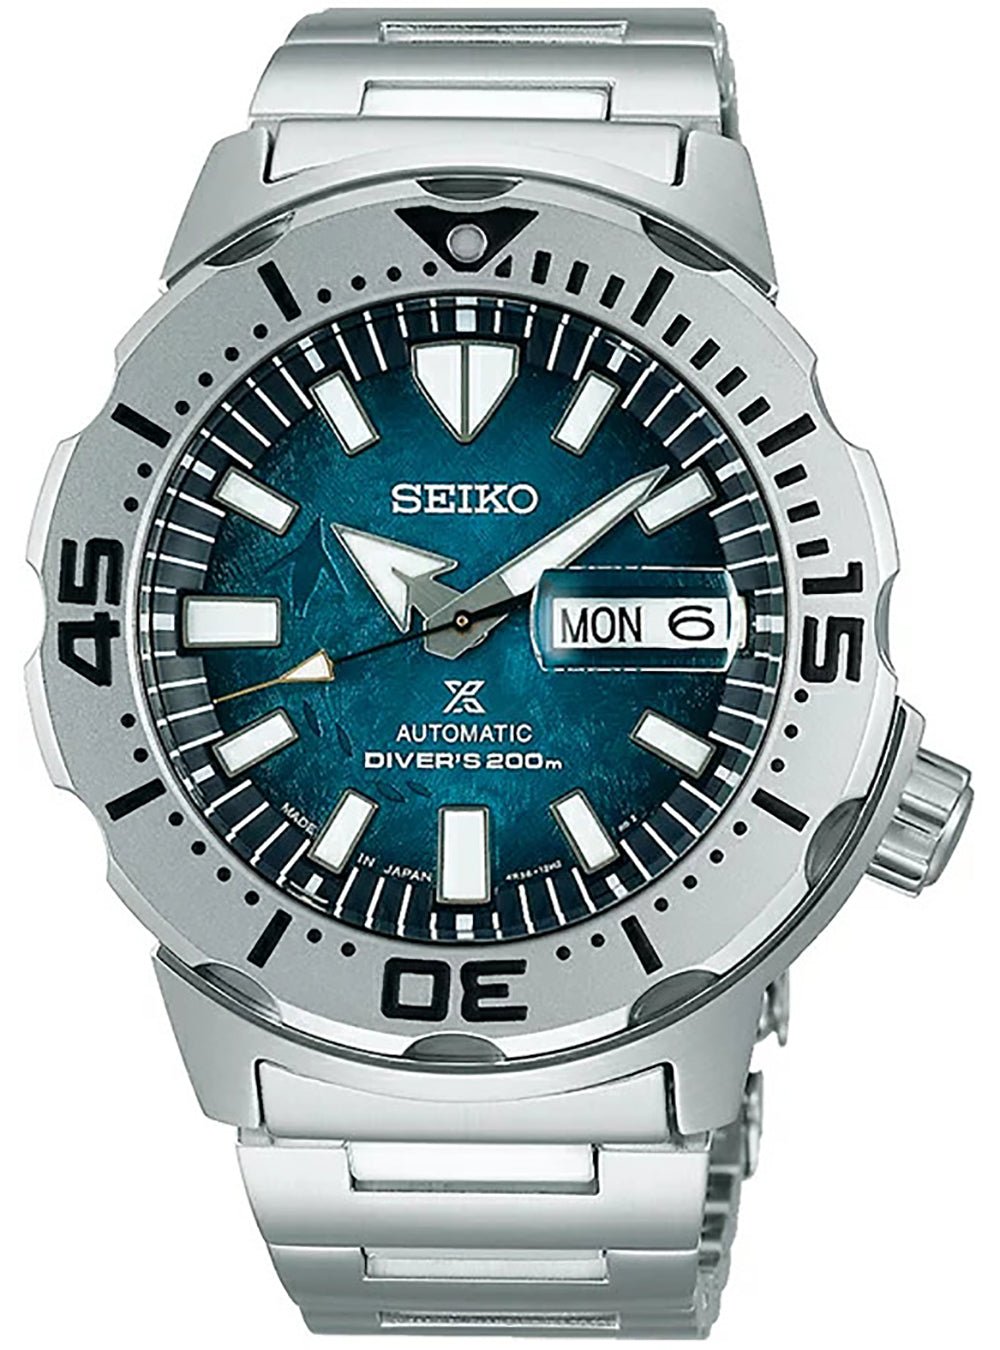 SEIKO PROSPEX DIVER SCUBA SAVE THE OCEAN SPECIAL EDITION MONSTER SBDY115 MADE IN JAPAN JDMjapan-select4954628461346WRISTWATCHSEIKO